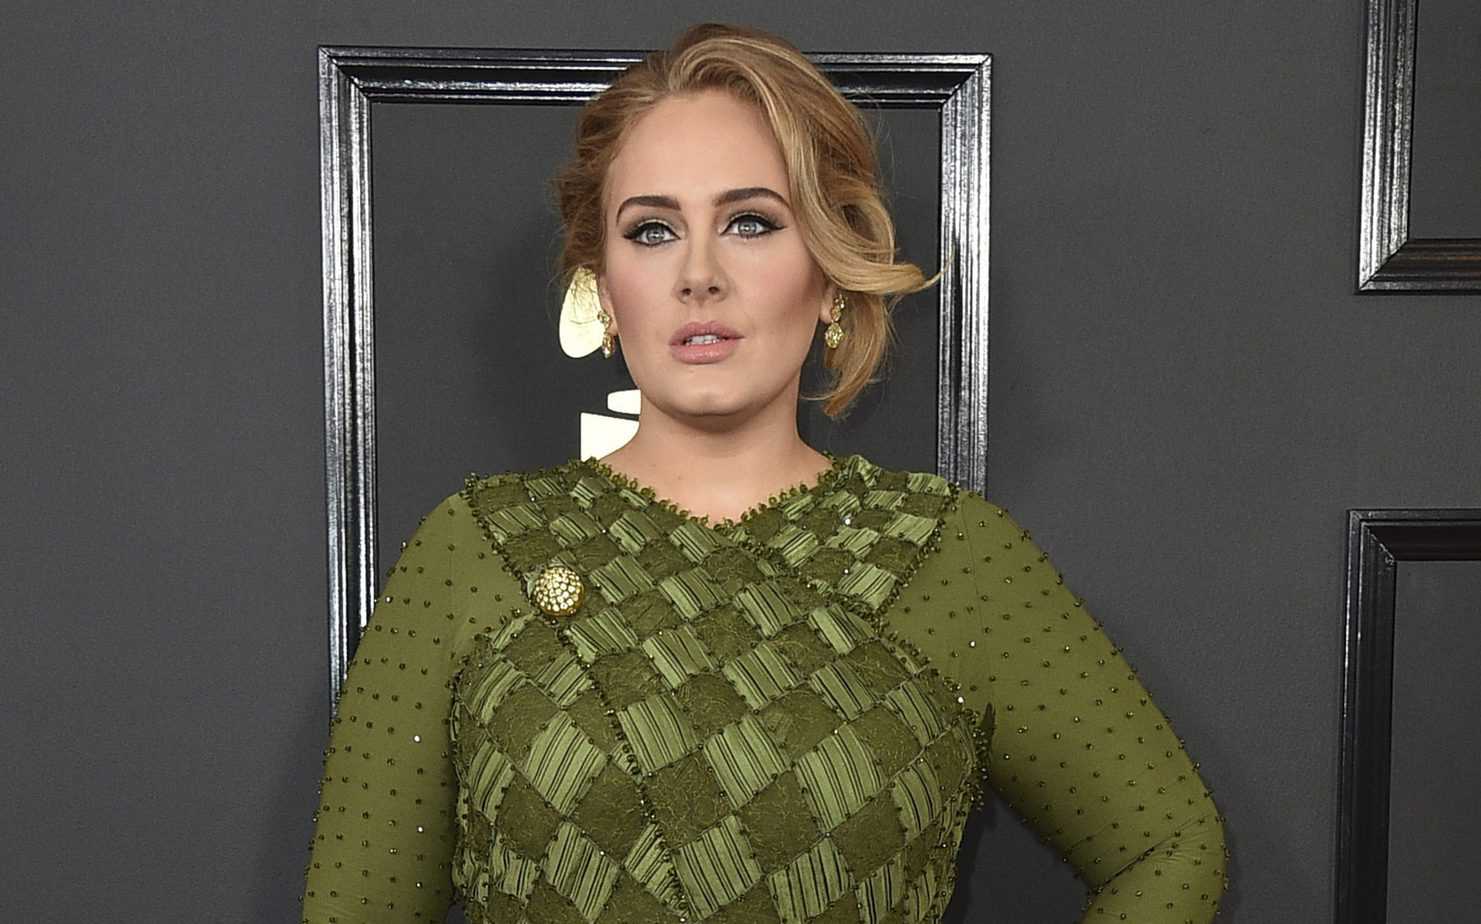 According to some reports, Adele has been "holed up" at Rich Paul's LA mansion in a desperate effort to try to save the power couple's relationship